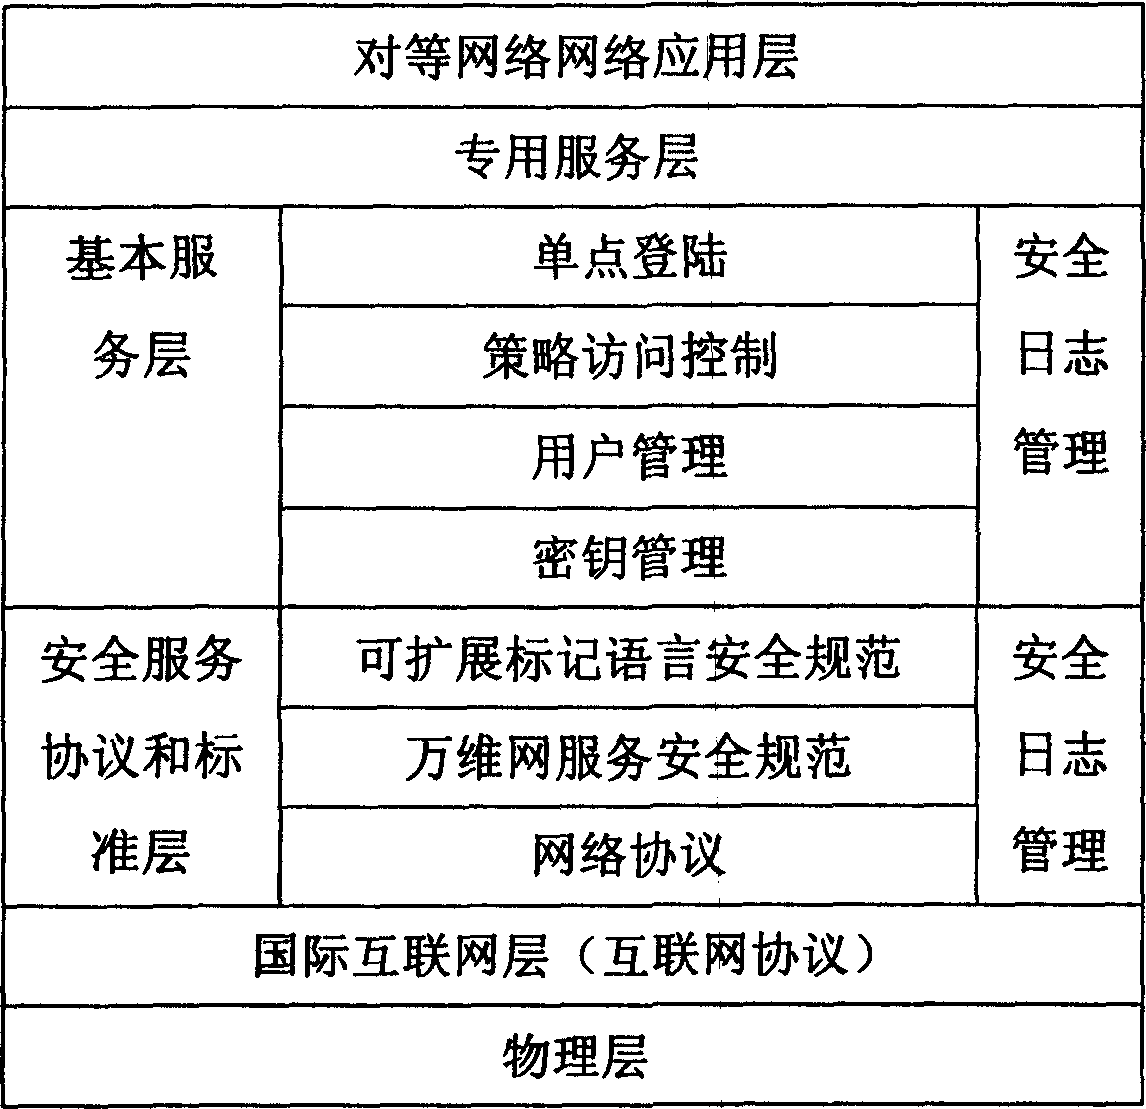 Service network safety system structure plan based on reciprocity calculation